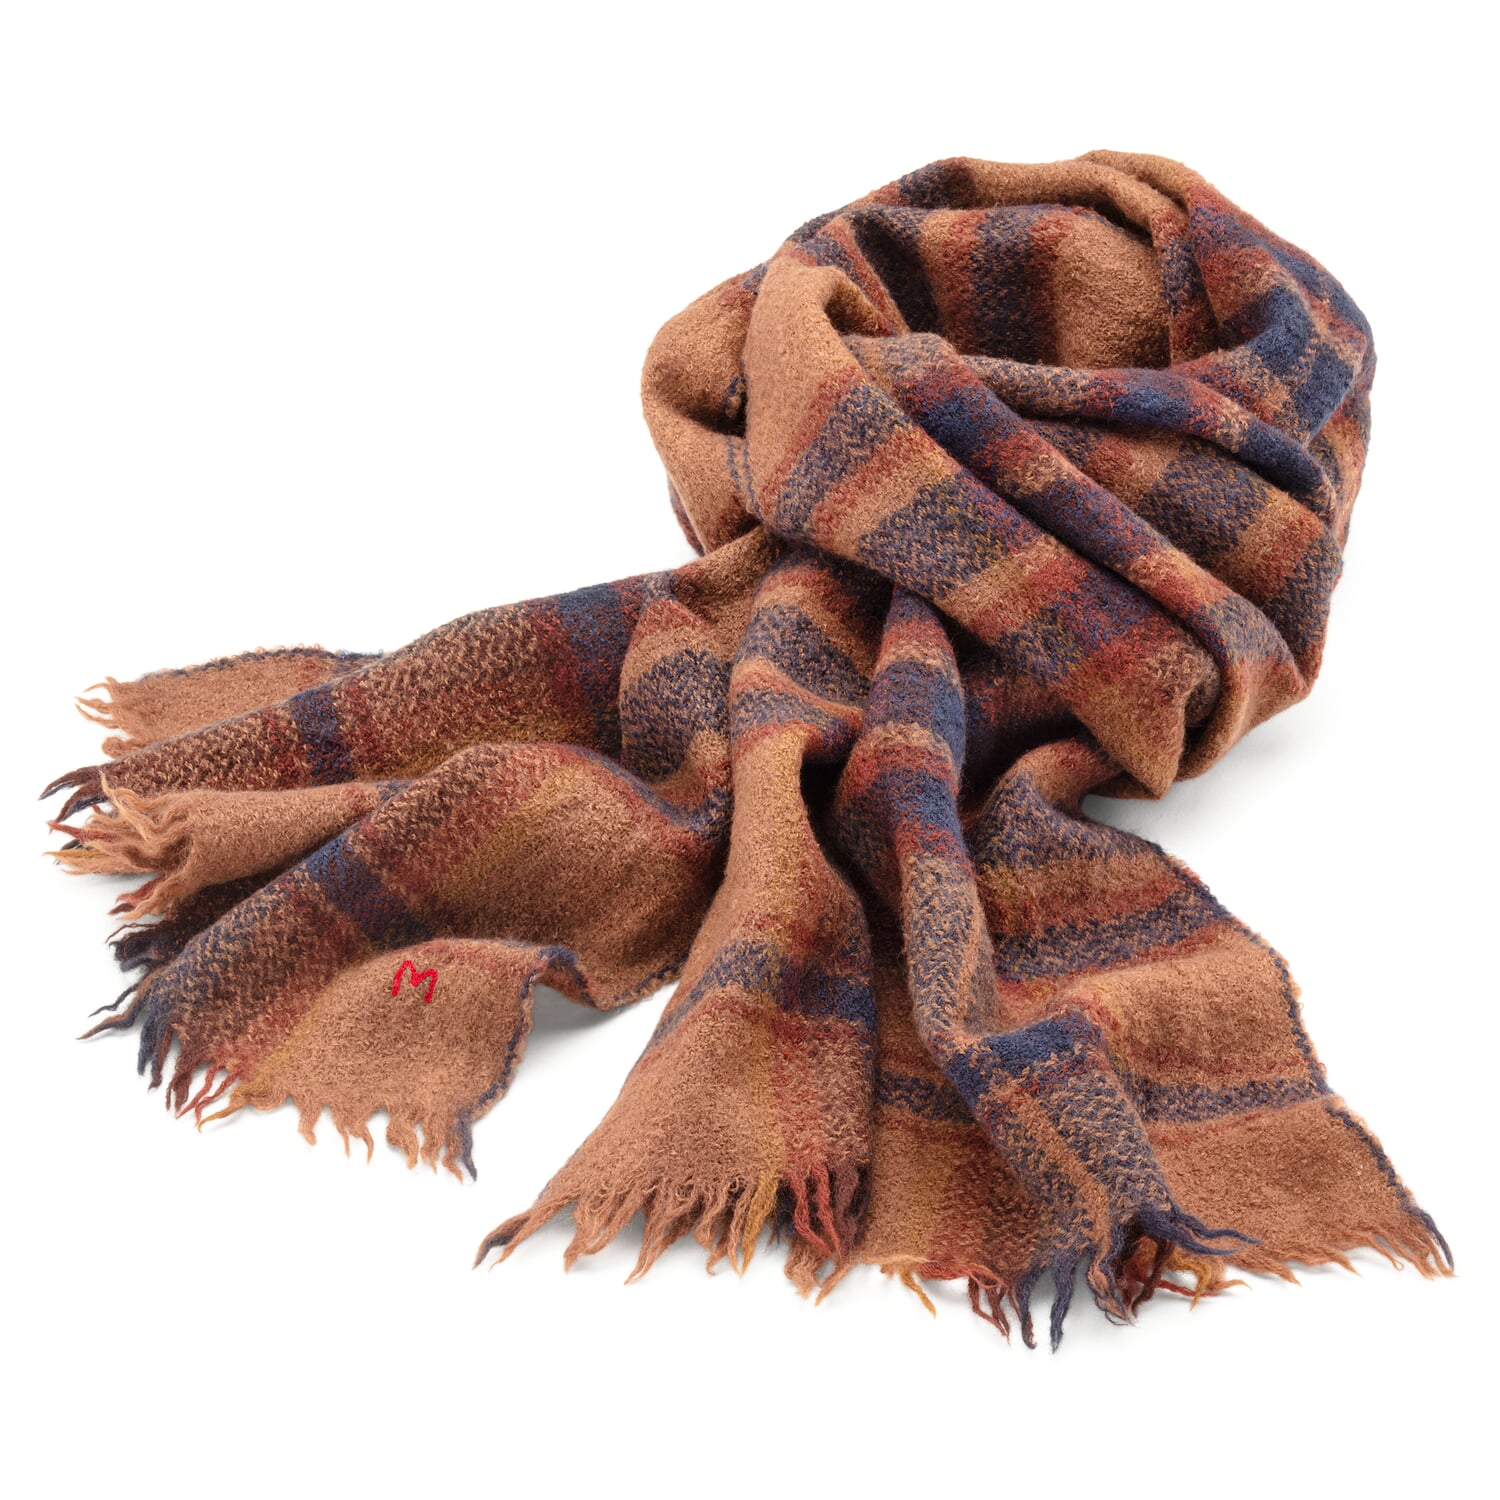 Acrylic Scarf Manufacturers in India, Acrylic Blend Scarves